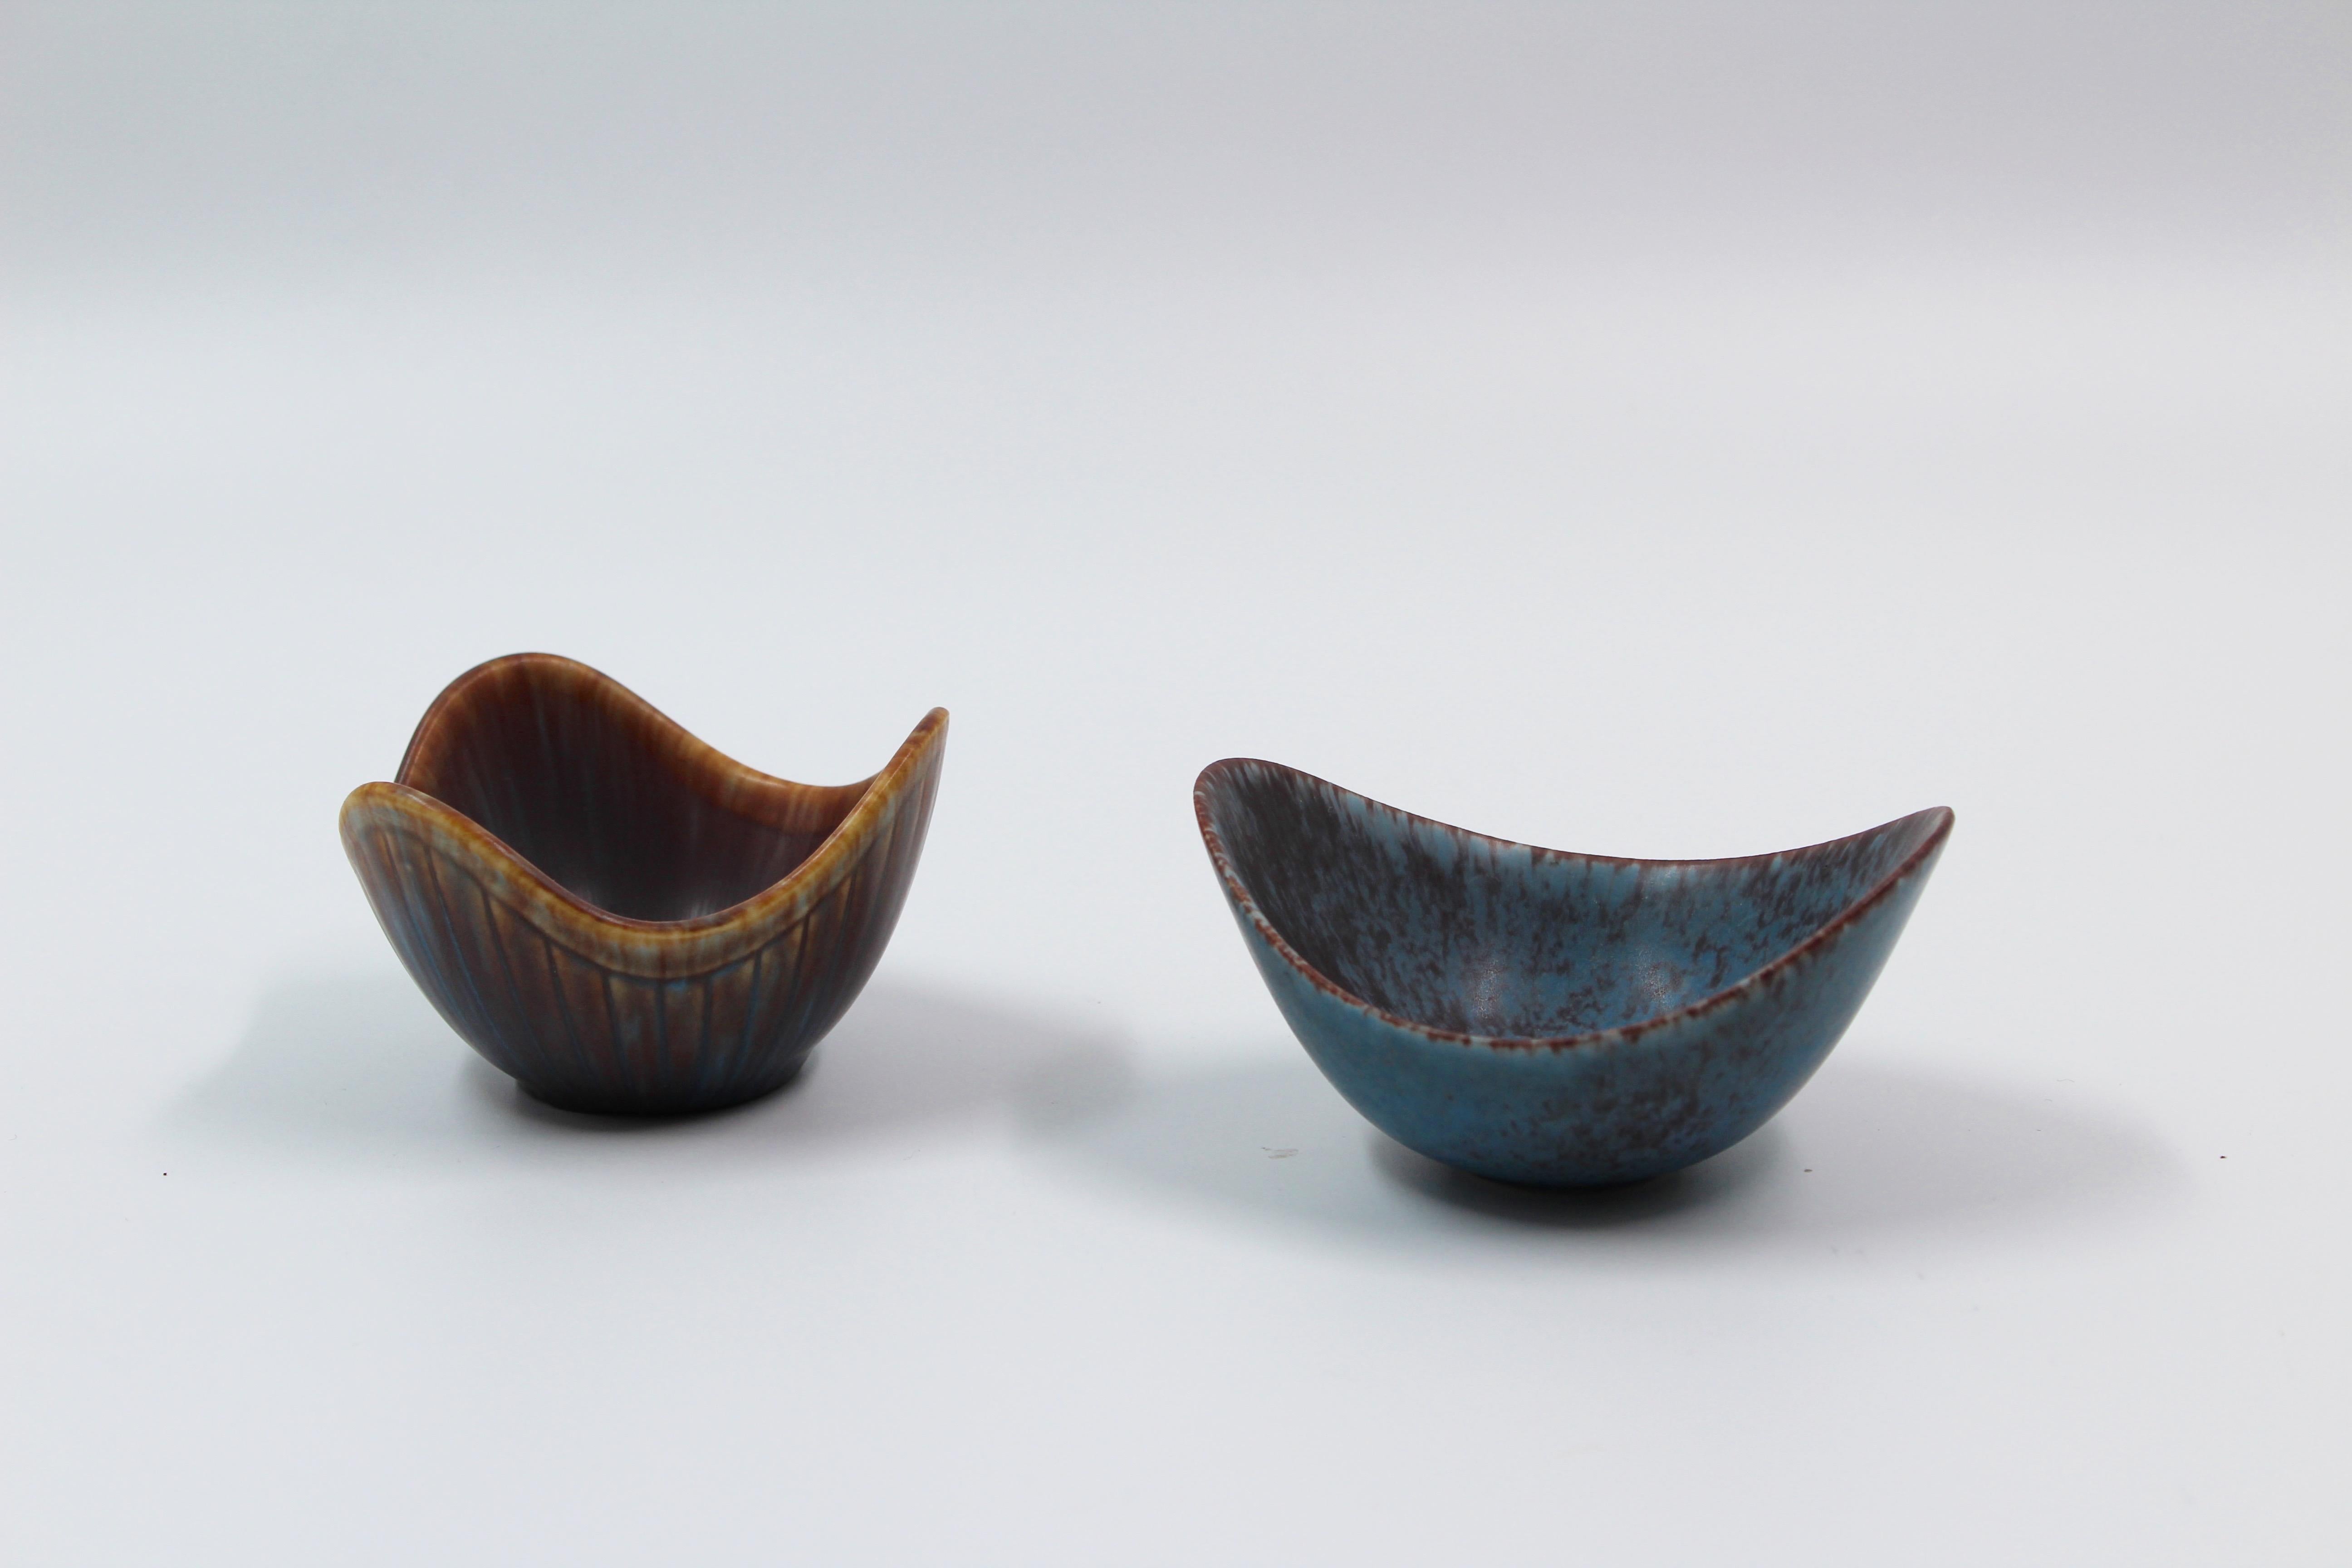 A set of two small ceramic bowls designed by Swedish potter Gunnar Nylund in the 1950s. Two different but equally beautiful glazes. Very good vintage condition.